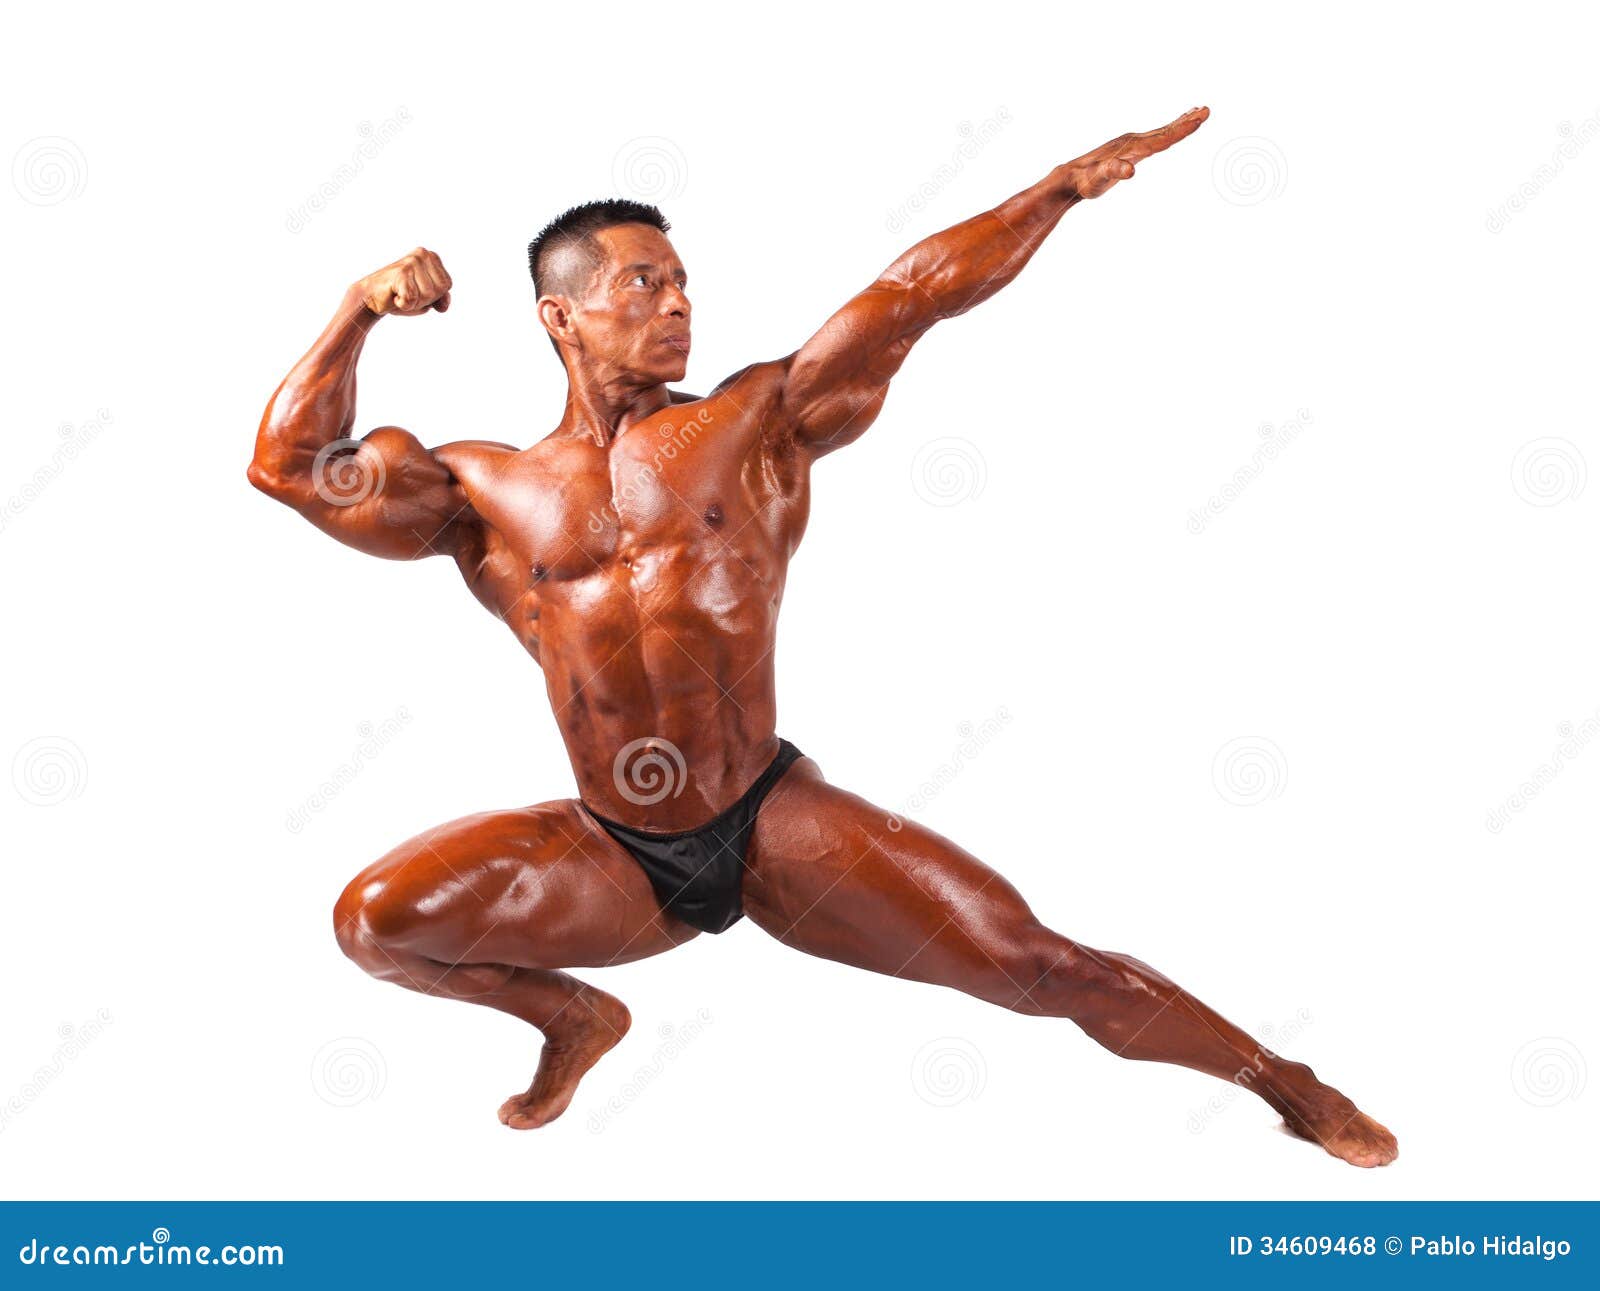 Bodybuilder Posing on a White Background Stock Photo - Image of body,  pectorals: 34609468